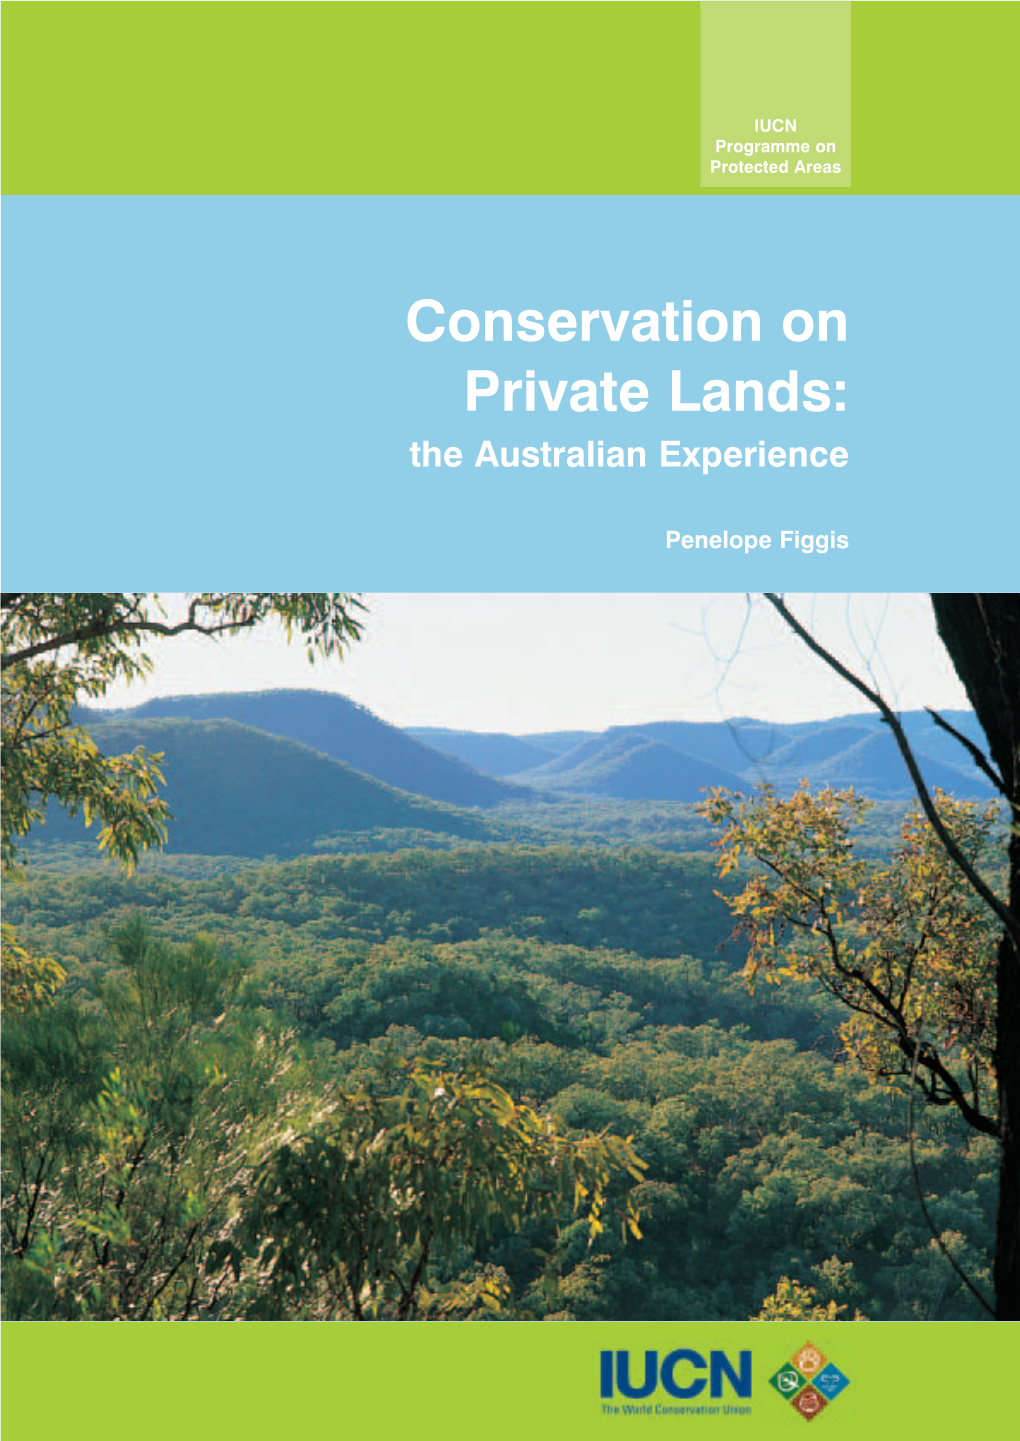 Conservation on Private Lands: the Australian Experience